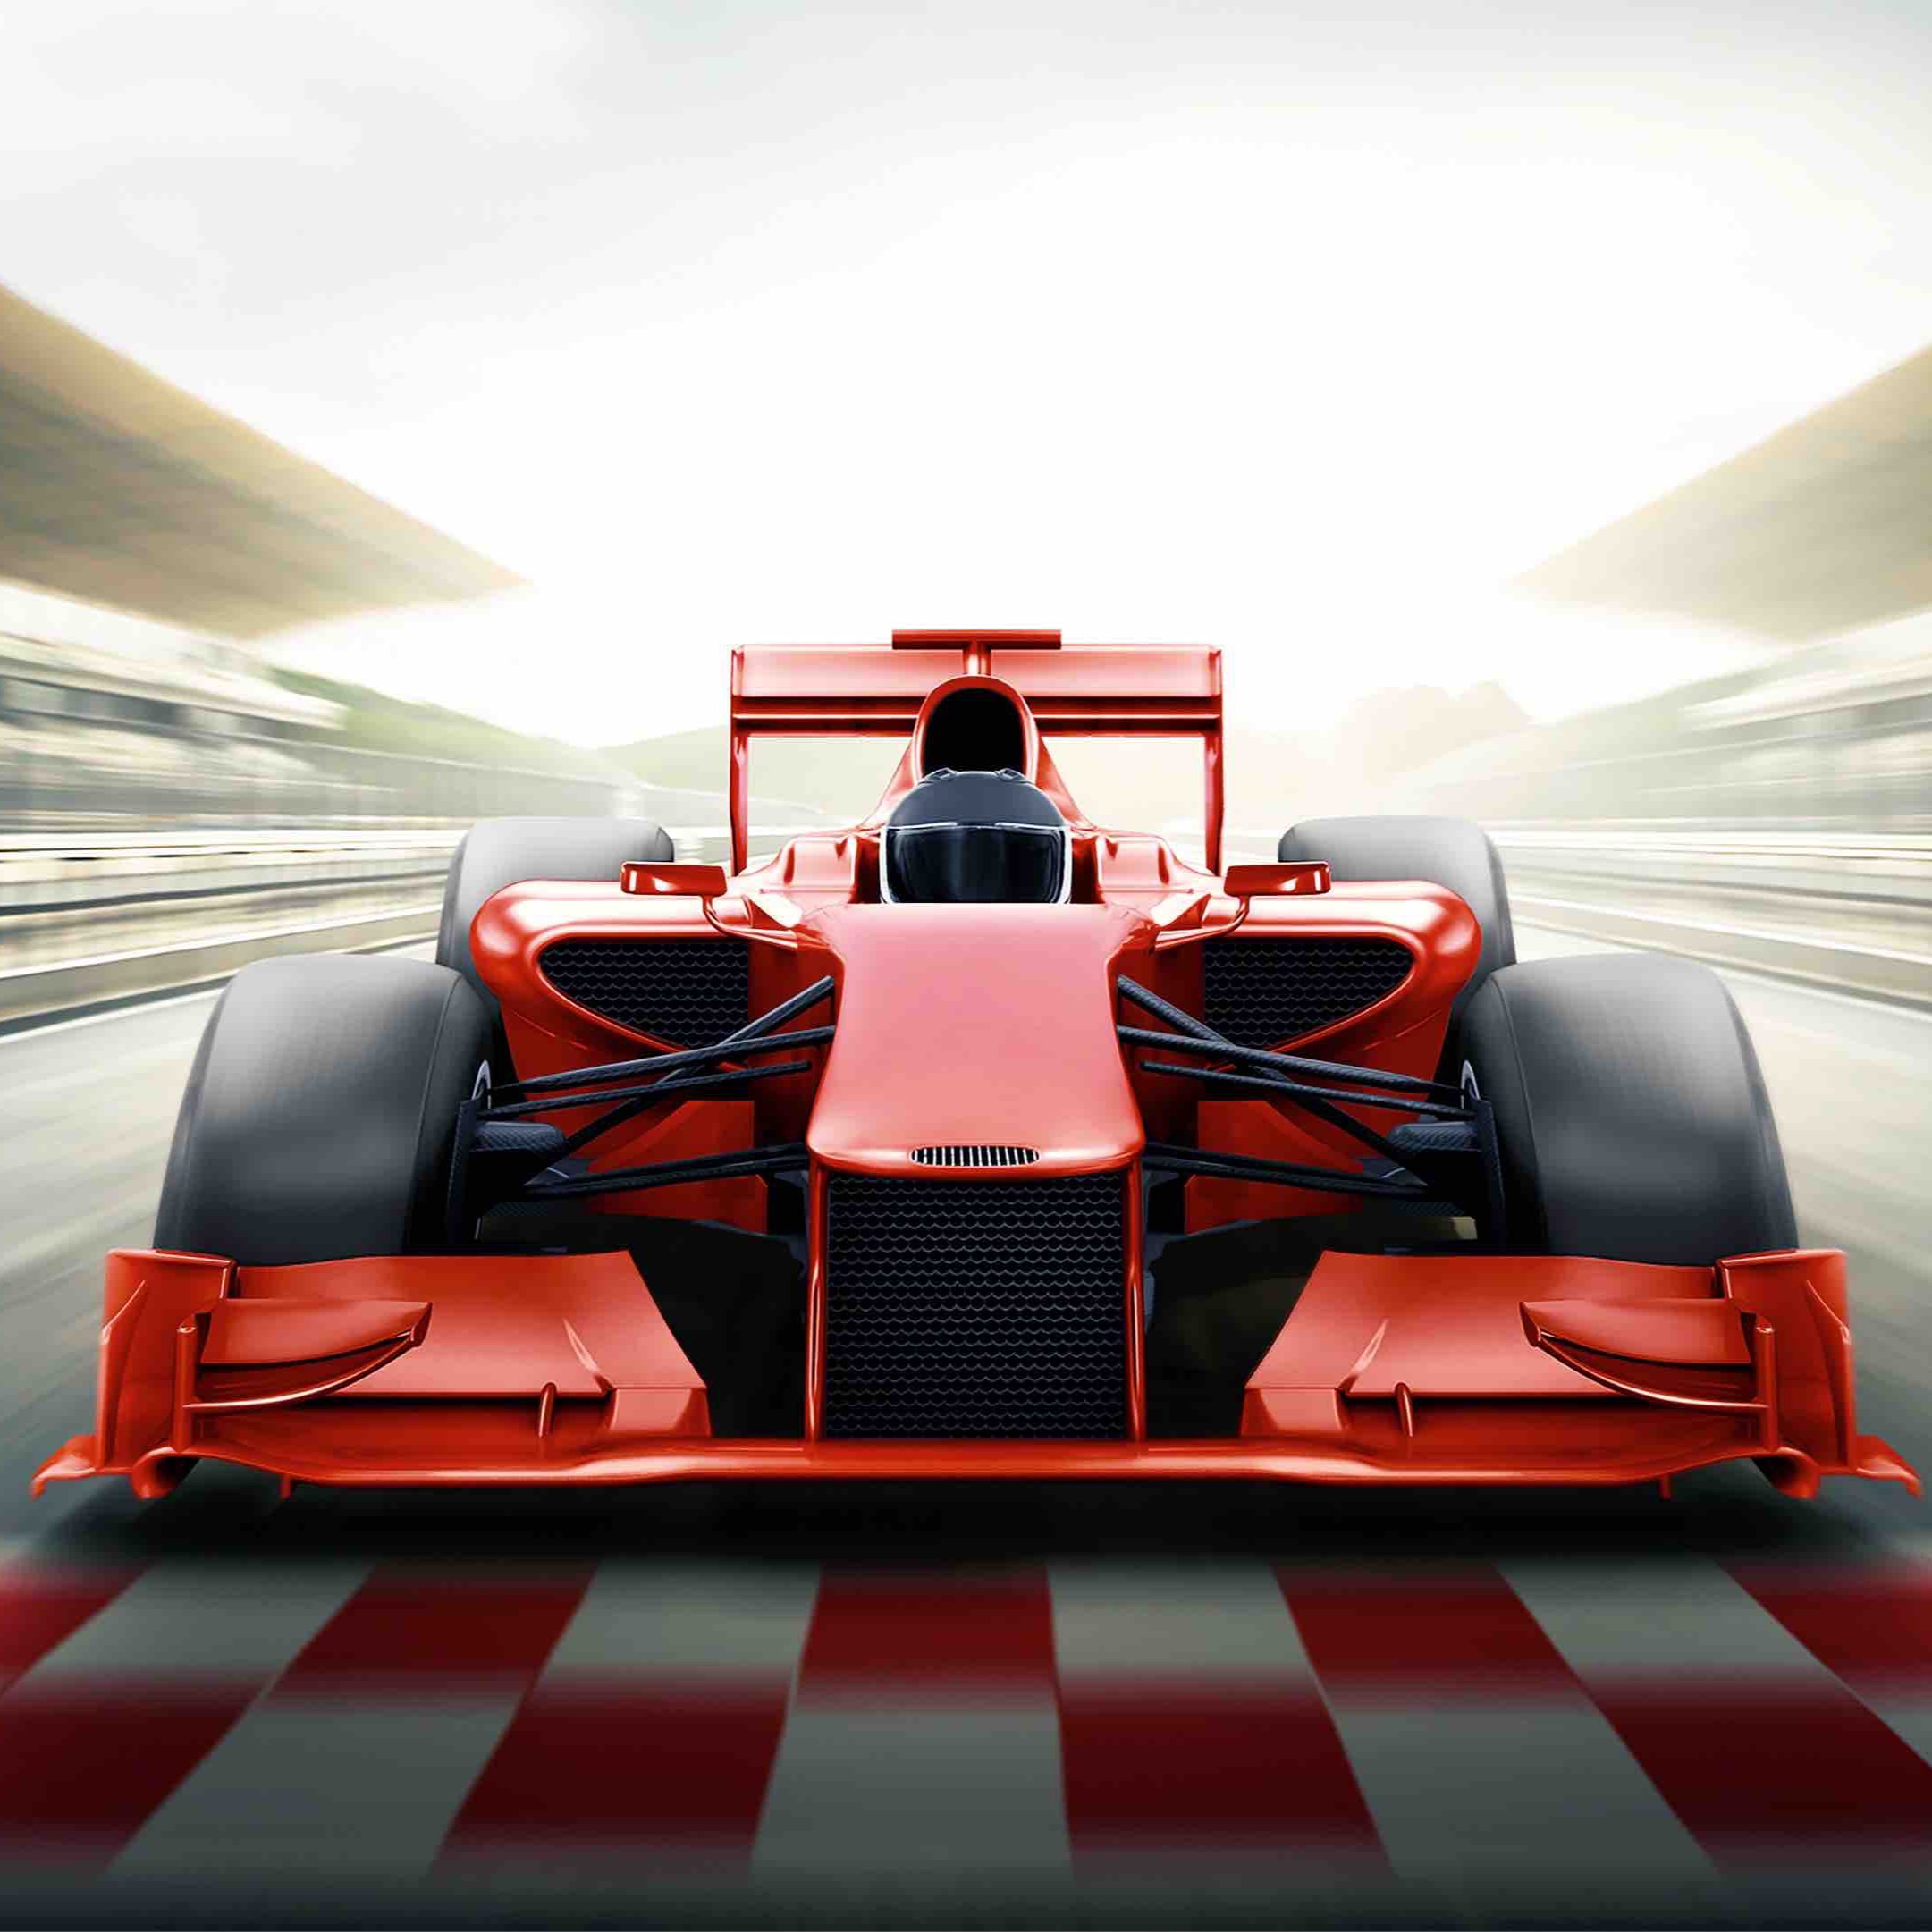 Miami Supercar Rooms Presents: Qualification Day for Formula 1